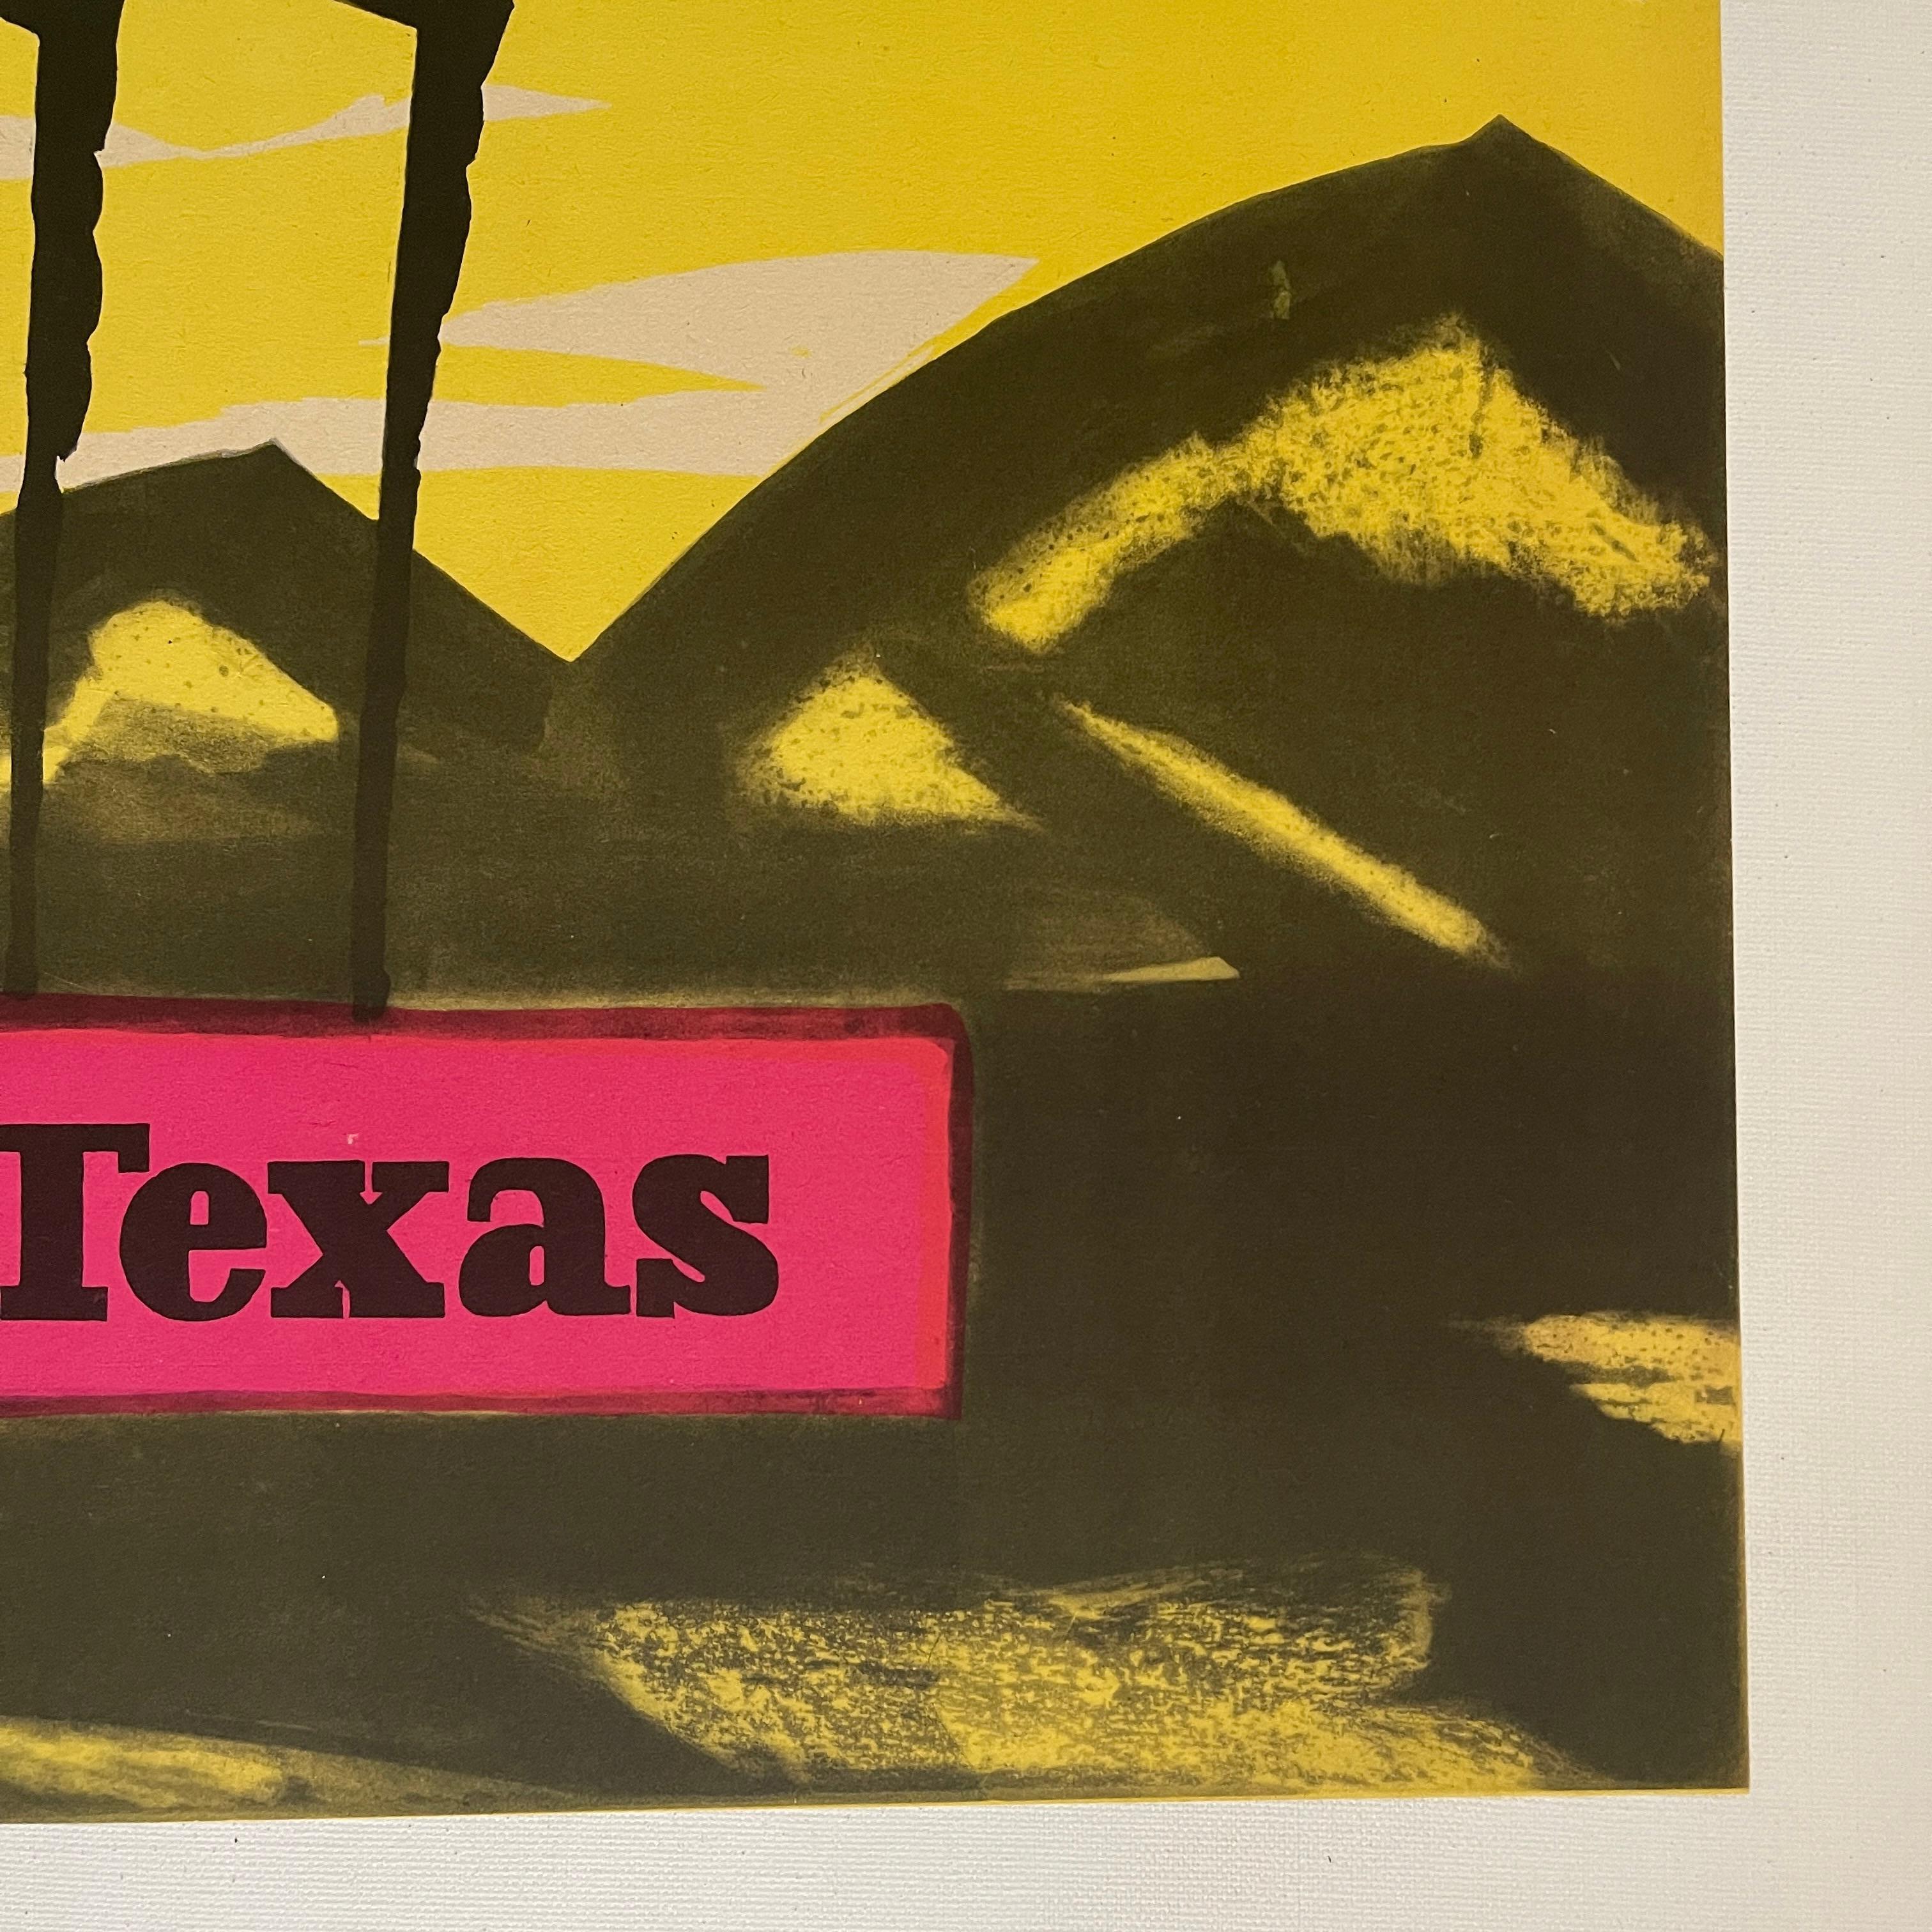 Mid-20th Century Ranch Texas, Vintage Polish Movie Poster by Jerzy Flisak, 1959 For Sale